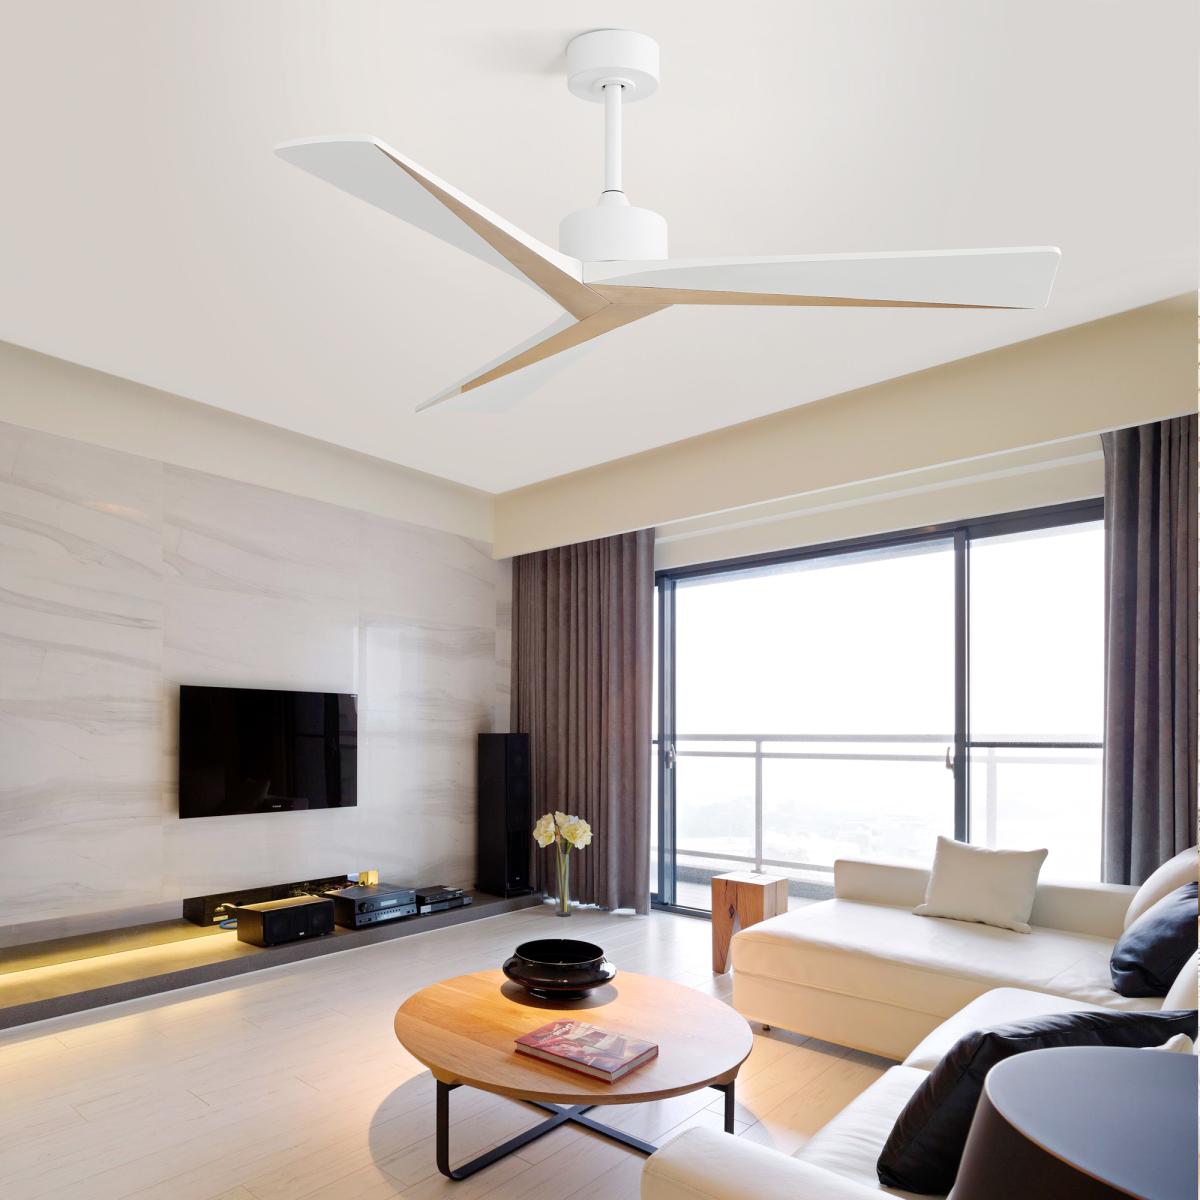 52 Inch Unique Design Ceiling Fan Without Light 3 Abs Blade with Dc Motor Remote Control